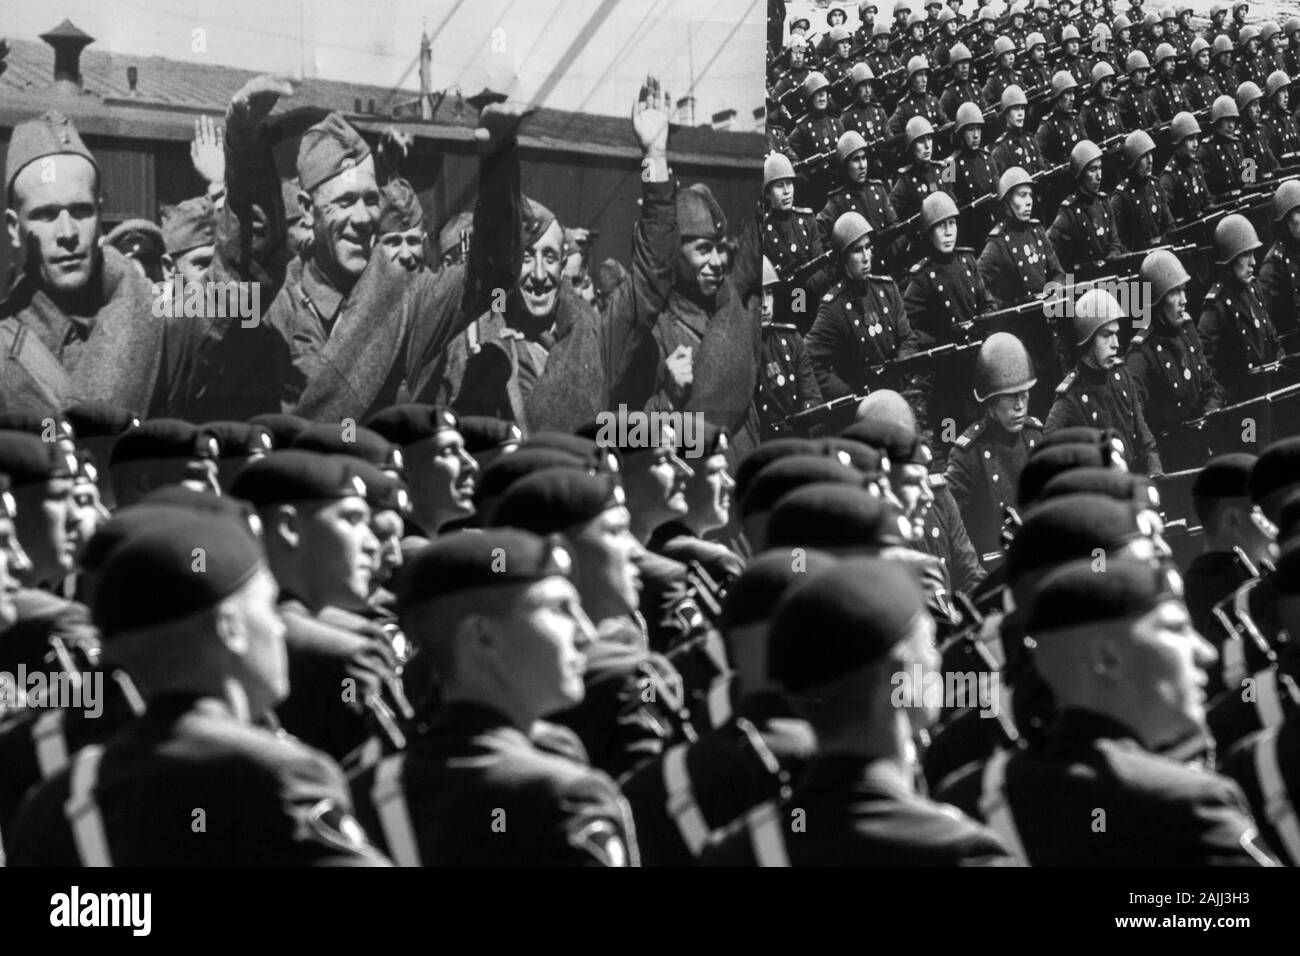 Moscow, Russia. 7th of May, 2015 Soldiers of the Russian army march on the background of a banner with historical photos of the Great Patriotic War during a Victory Day military parade marking the 70th anniversary of the Victory over Nazi Germany in the Great Patriotic War of 1941-1945 Stock Photo